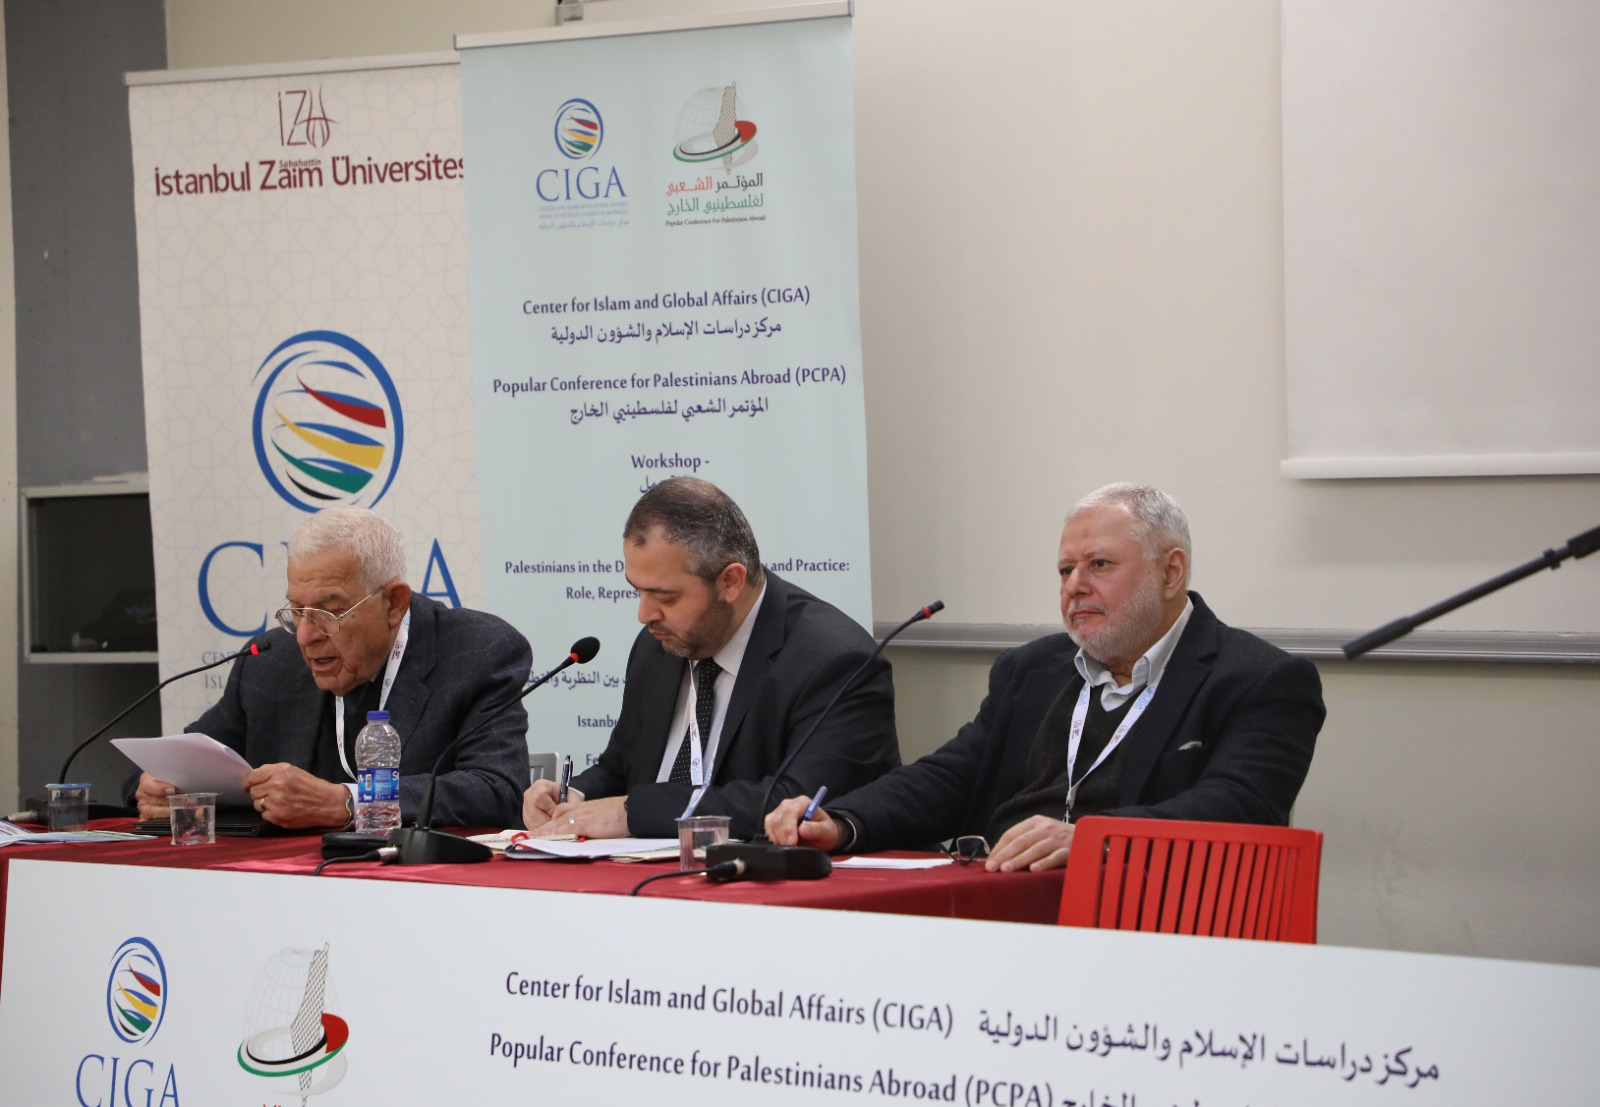 Legal, Political and Historical Dimensions of the Palestinian Elections and Representations" Symposium Held in Istanbul"